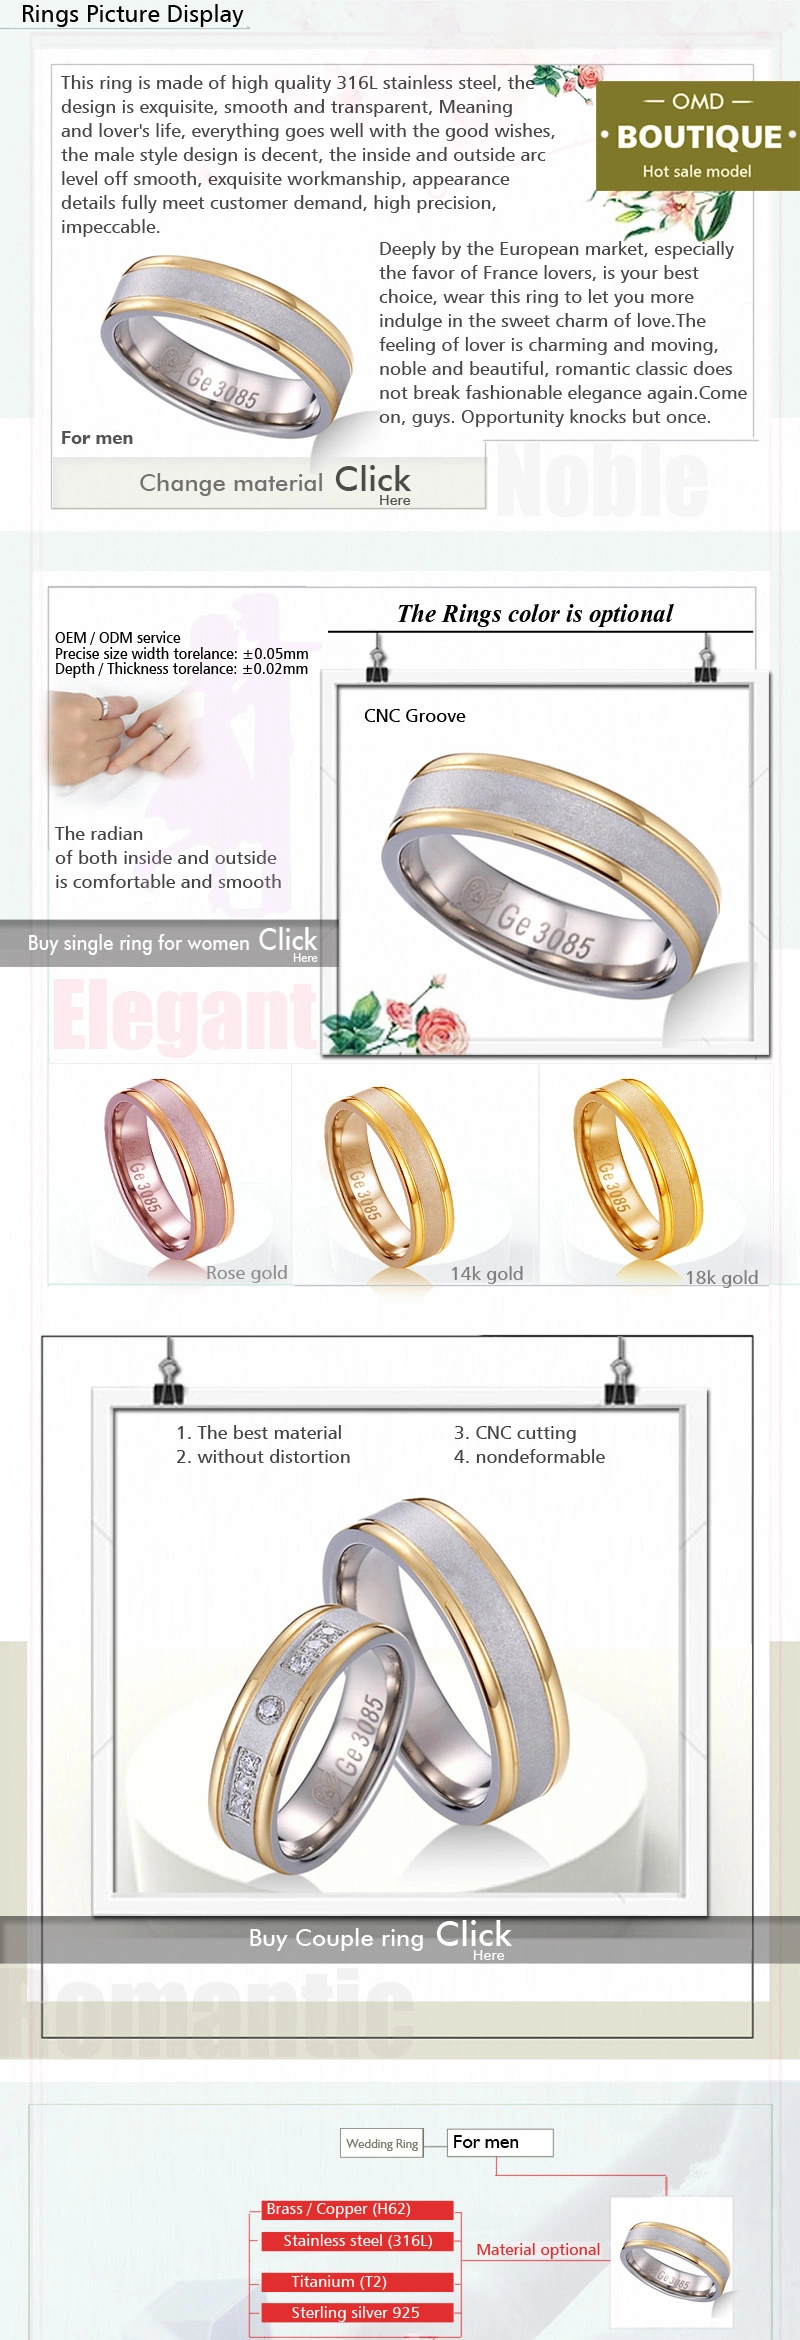 Stainless Steel Ring with Diamond New Arrival Rings Wedding Jewelry